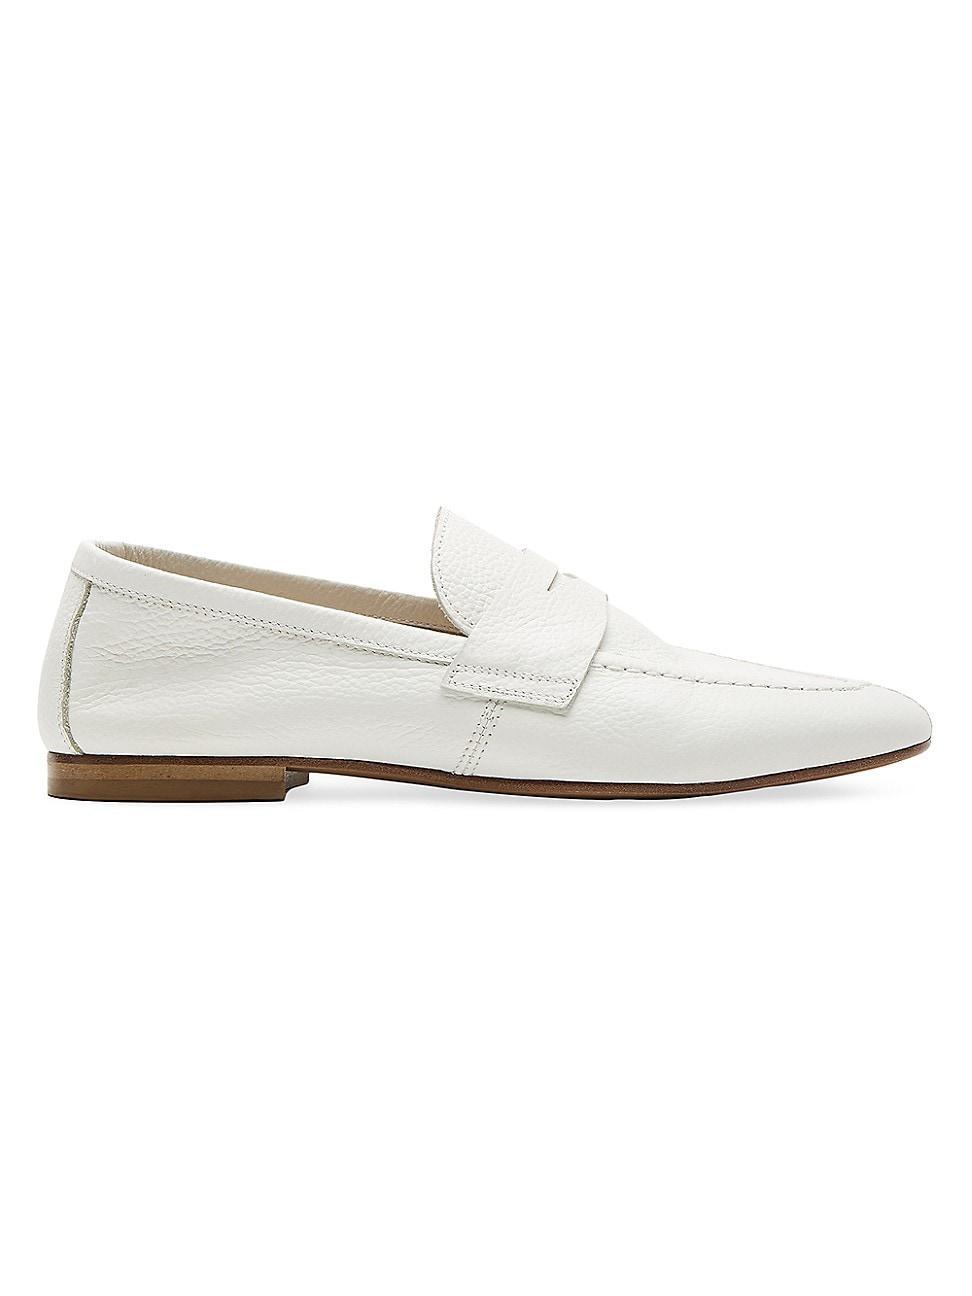 La Canadienne Womens Baz Loafers Product Image